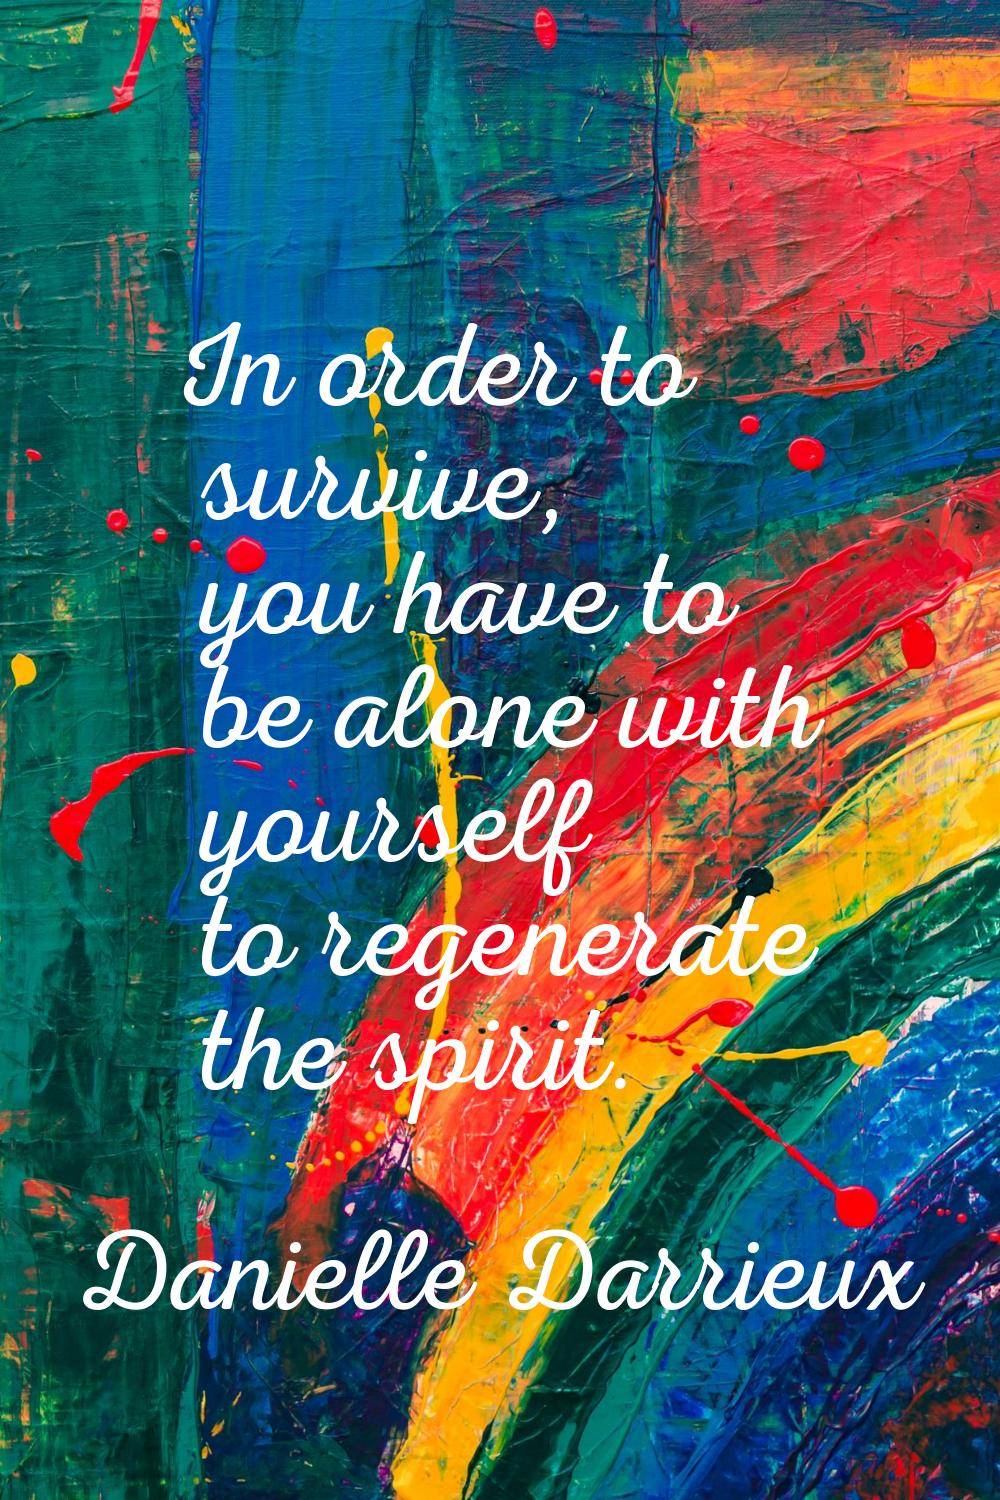 In order to survive, you have to be alone with yourself to regenerate the spirit.